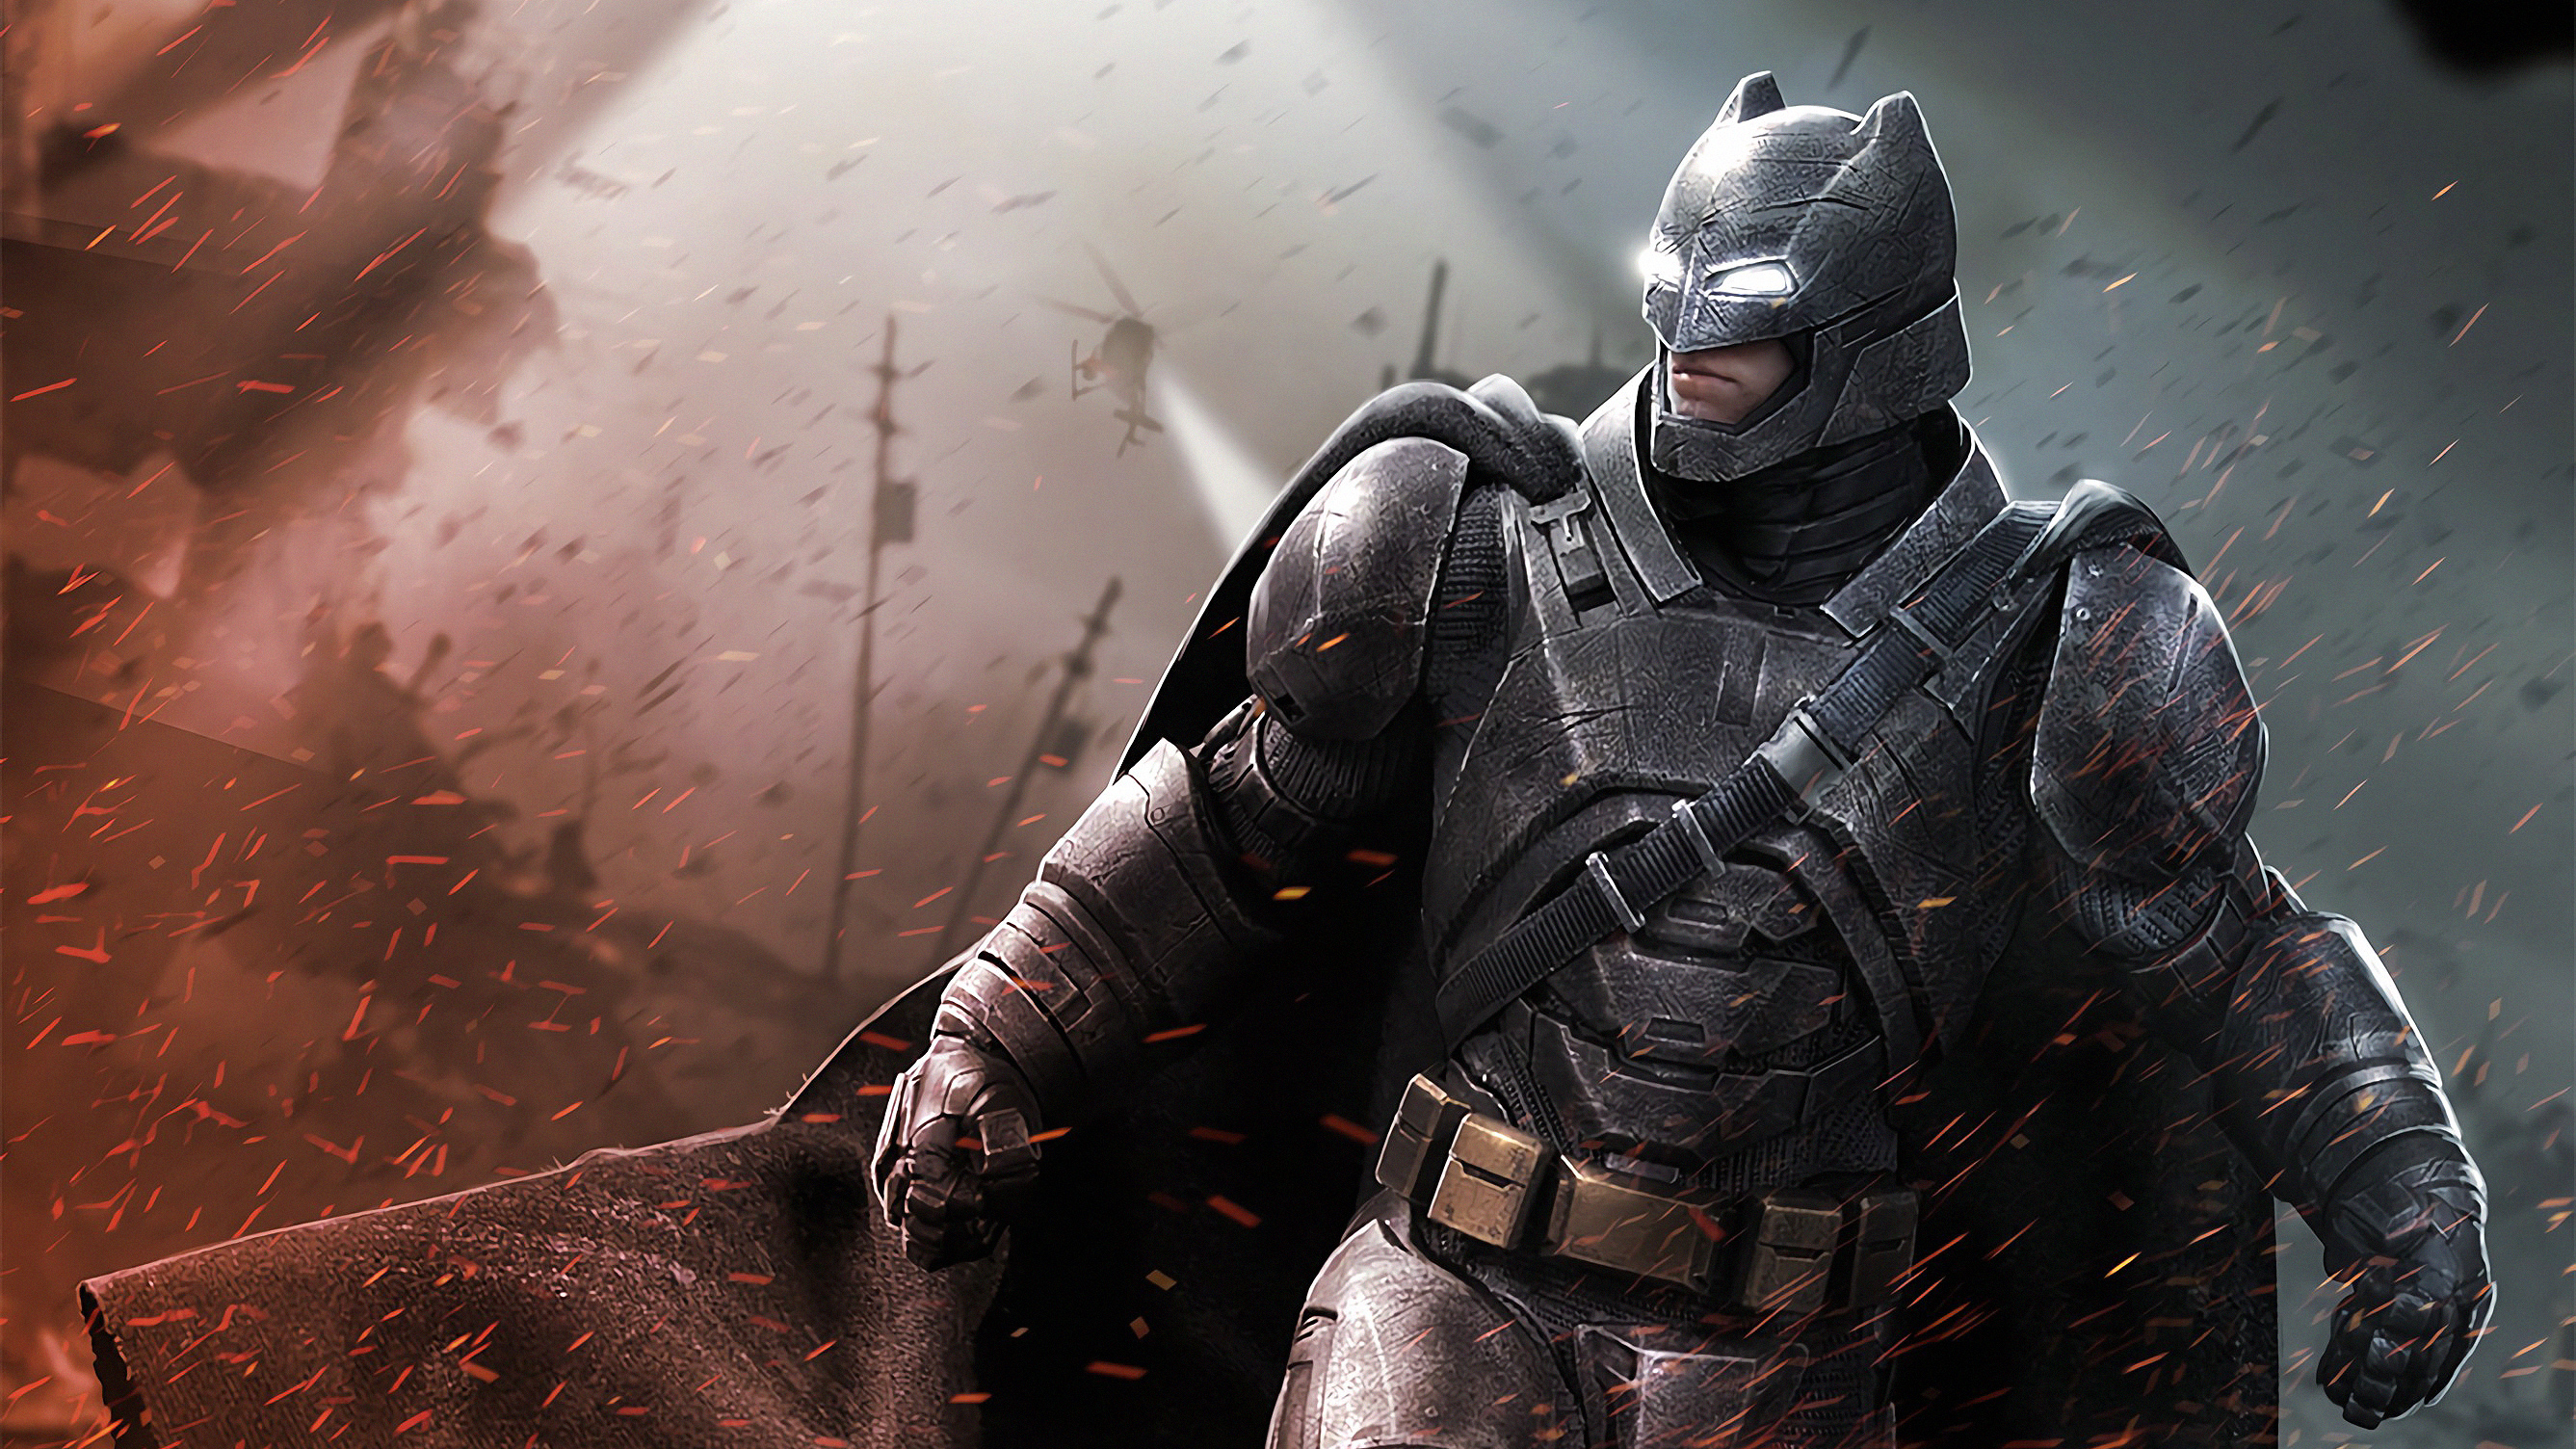 Batman Armour Art, HD Superheroes, 4k Wallpaper, Image, Background, Photo and Picture